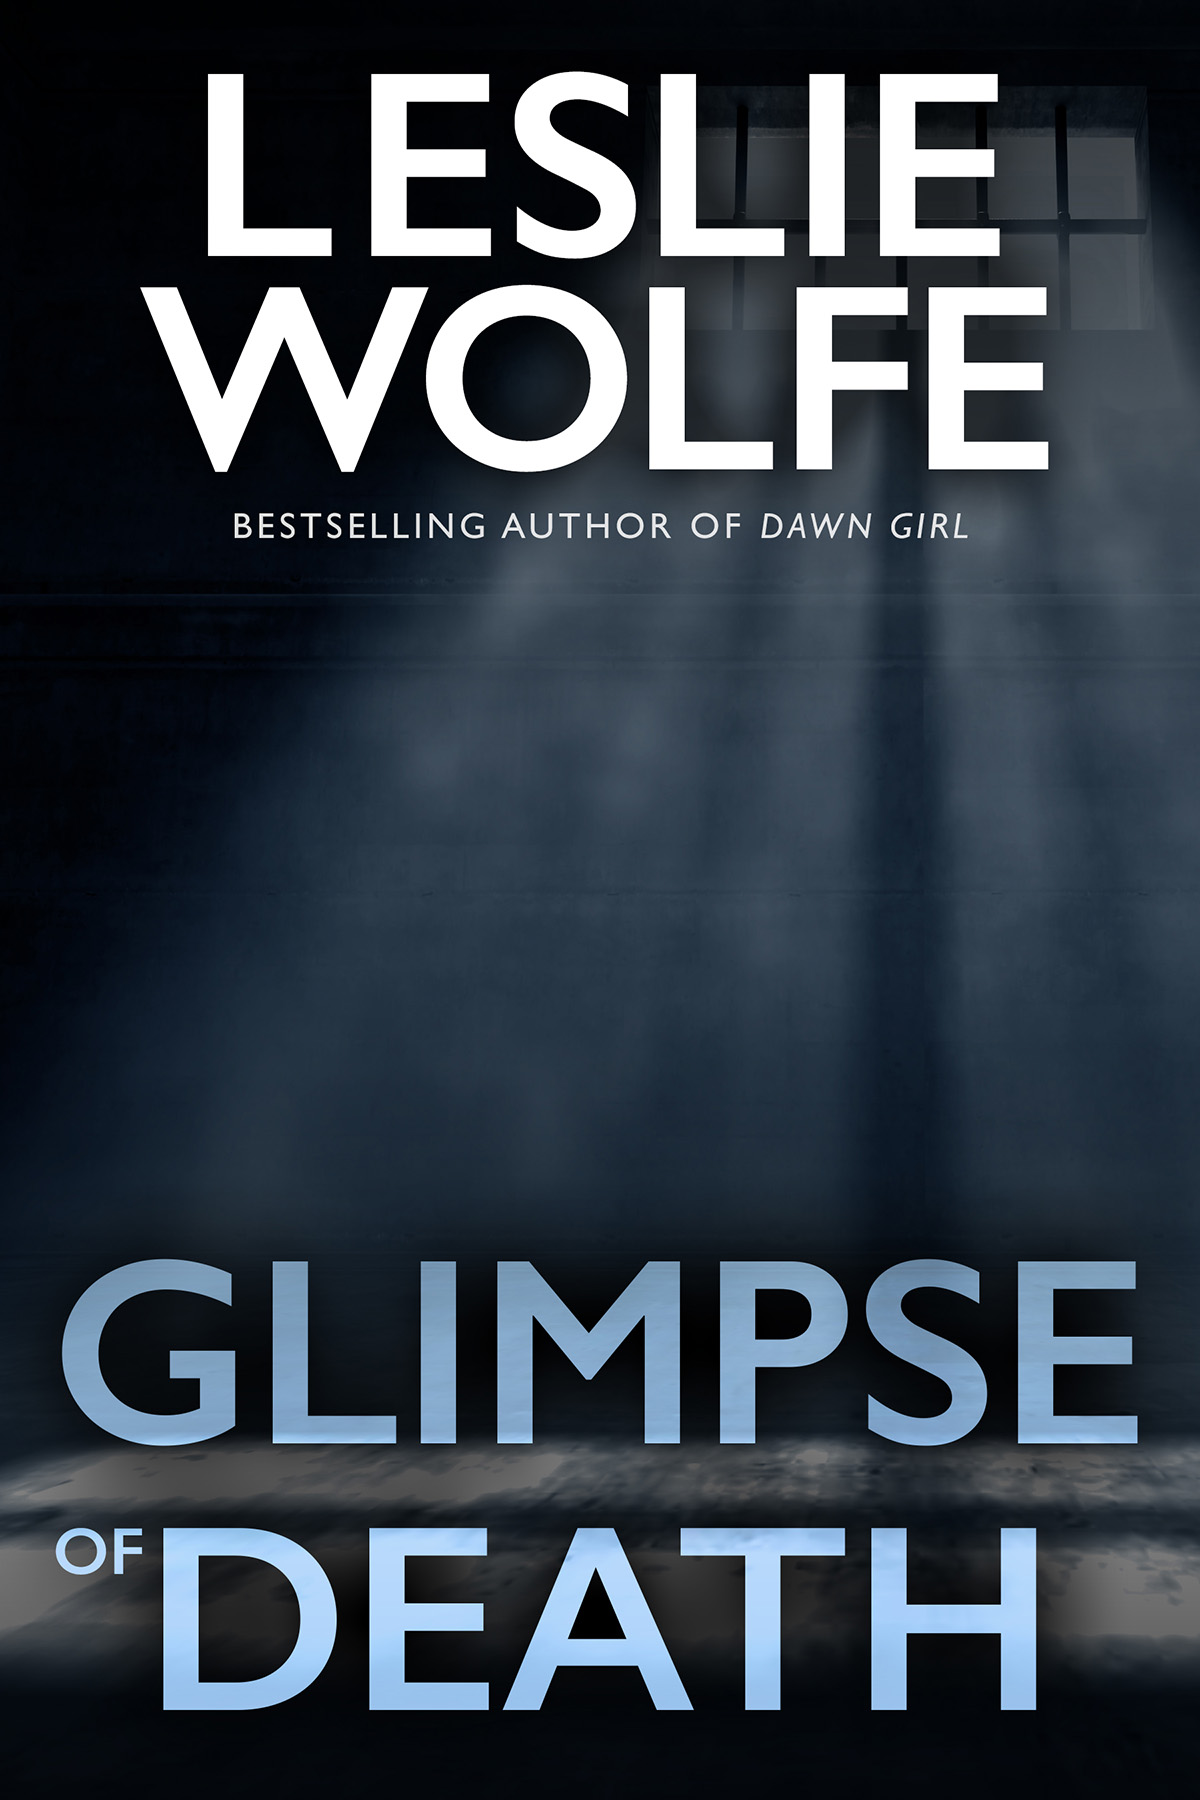 Glimpse of Death by Leslie Wolfe